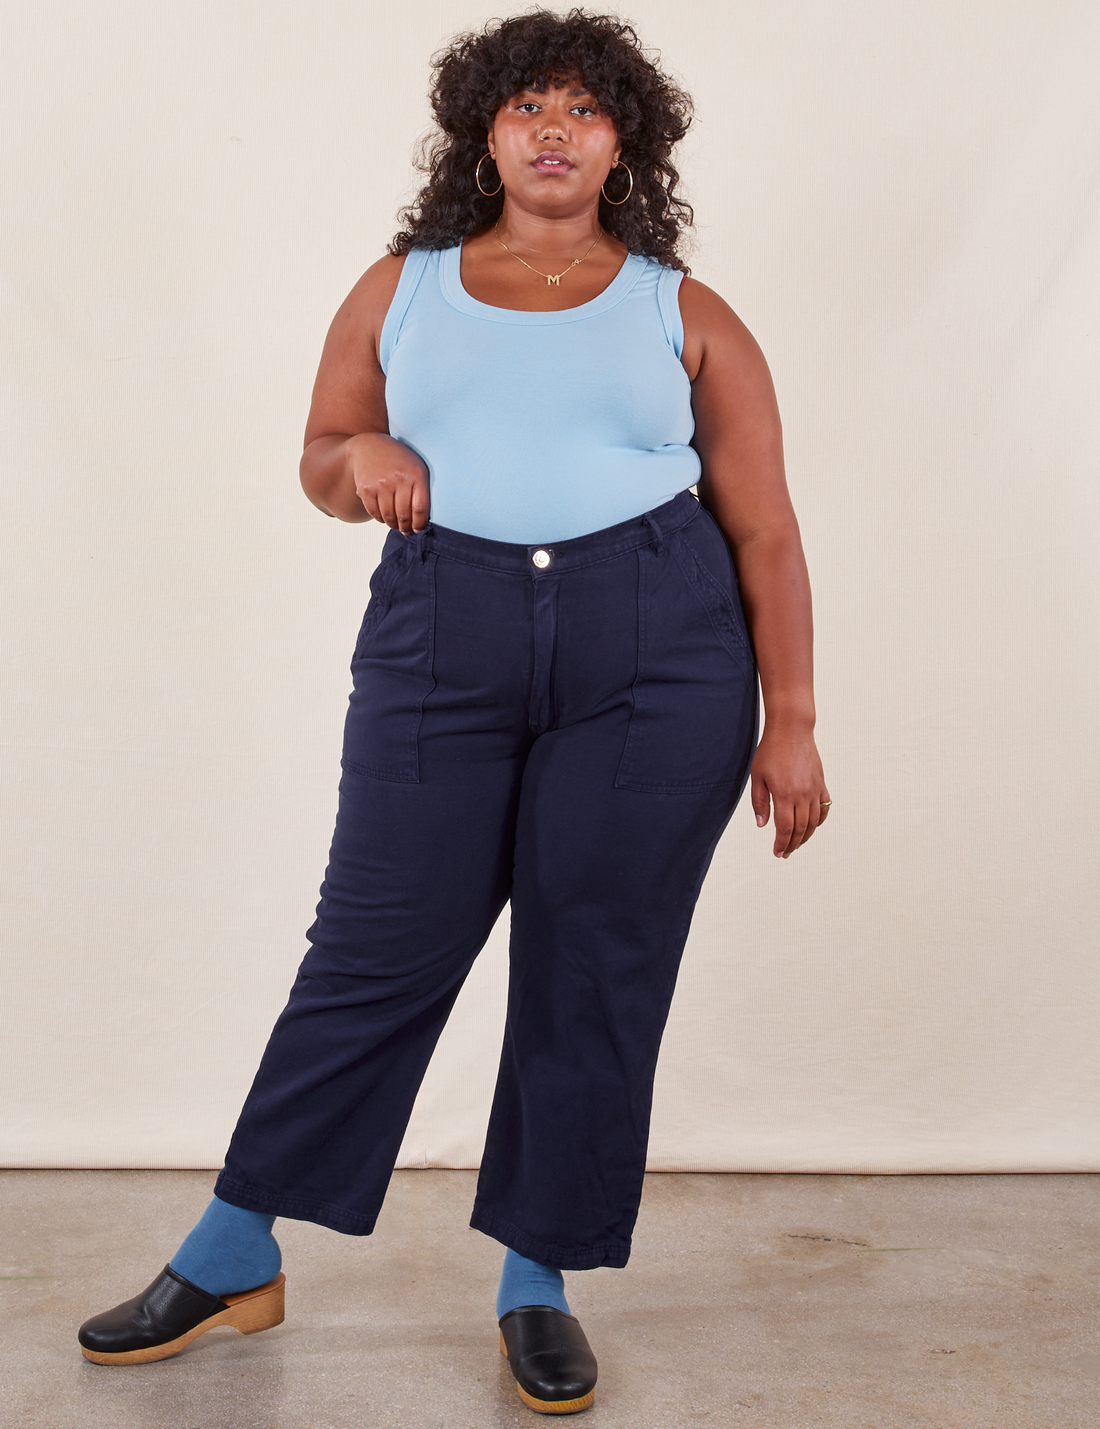 Morgan is 5'5" and wearing Petite 1XL Work Pants in Navy Blue paired with baby blue Tank Top